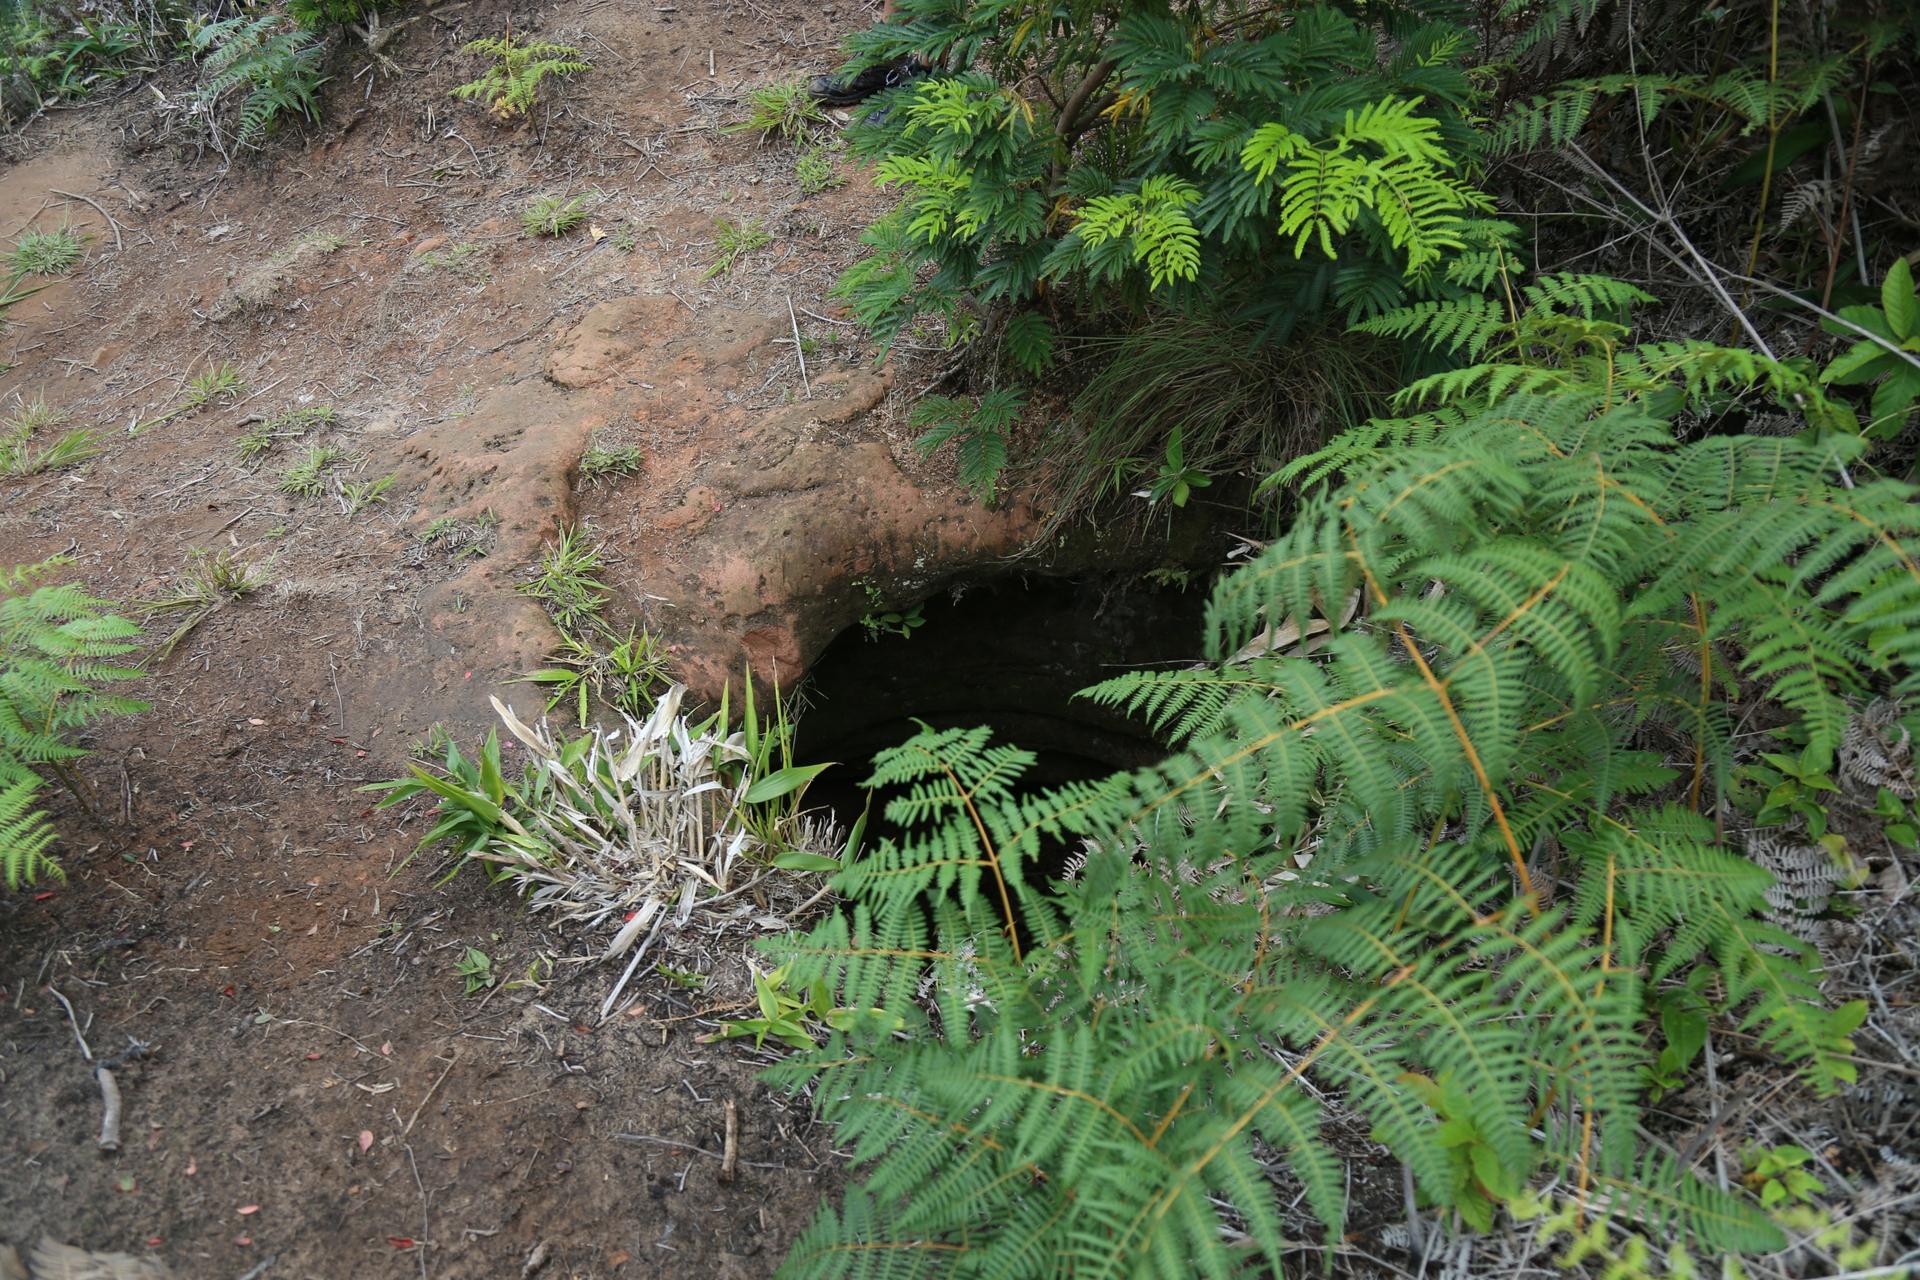 For many years, locals in southern Brazil said these tunnels were dug by the Xokleng Indigenous peoples in order to hide out when under attack by colonizing Europeans.